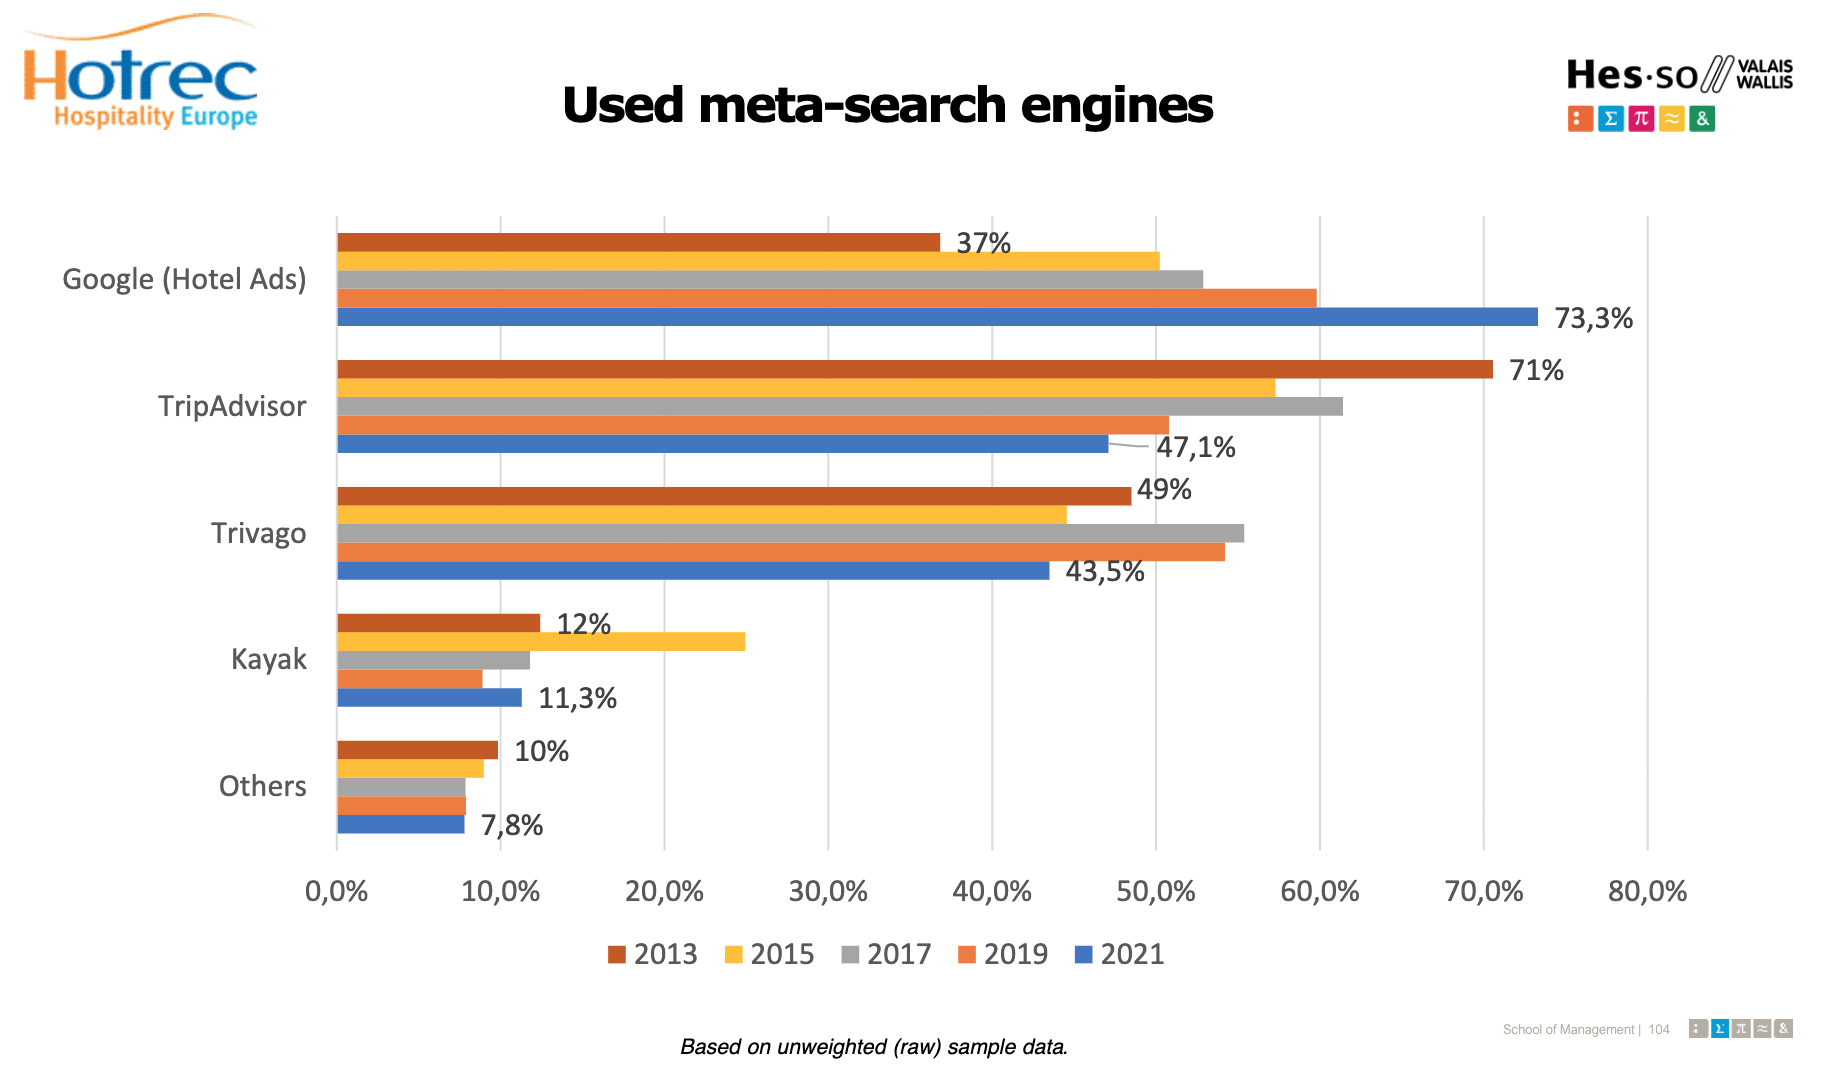 Used meta-search engines